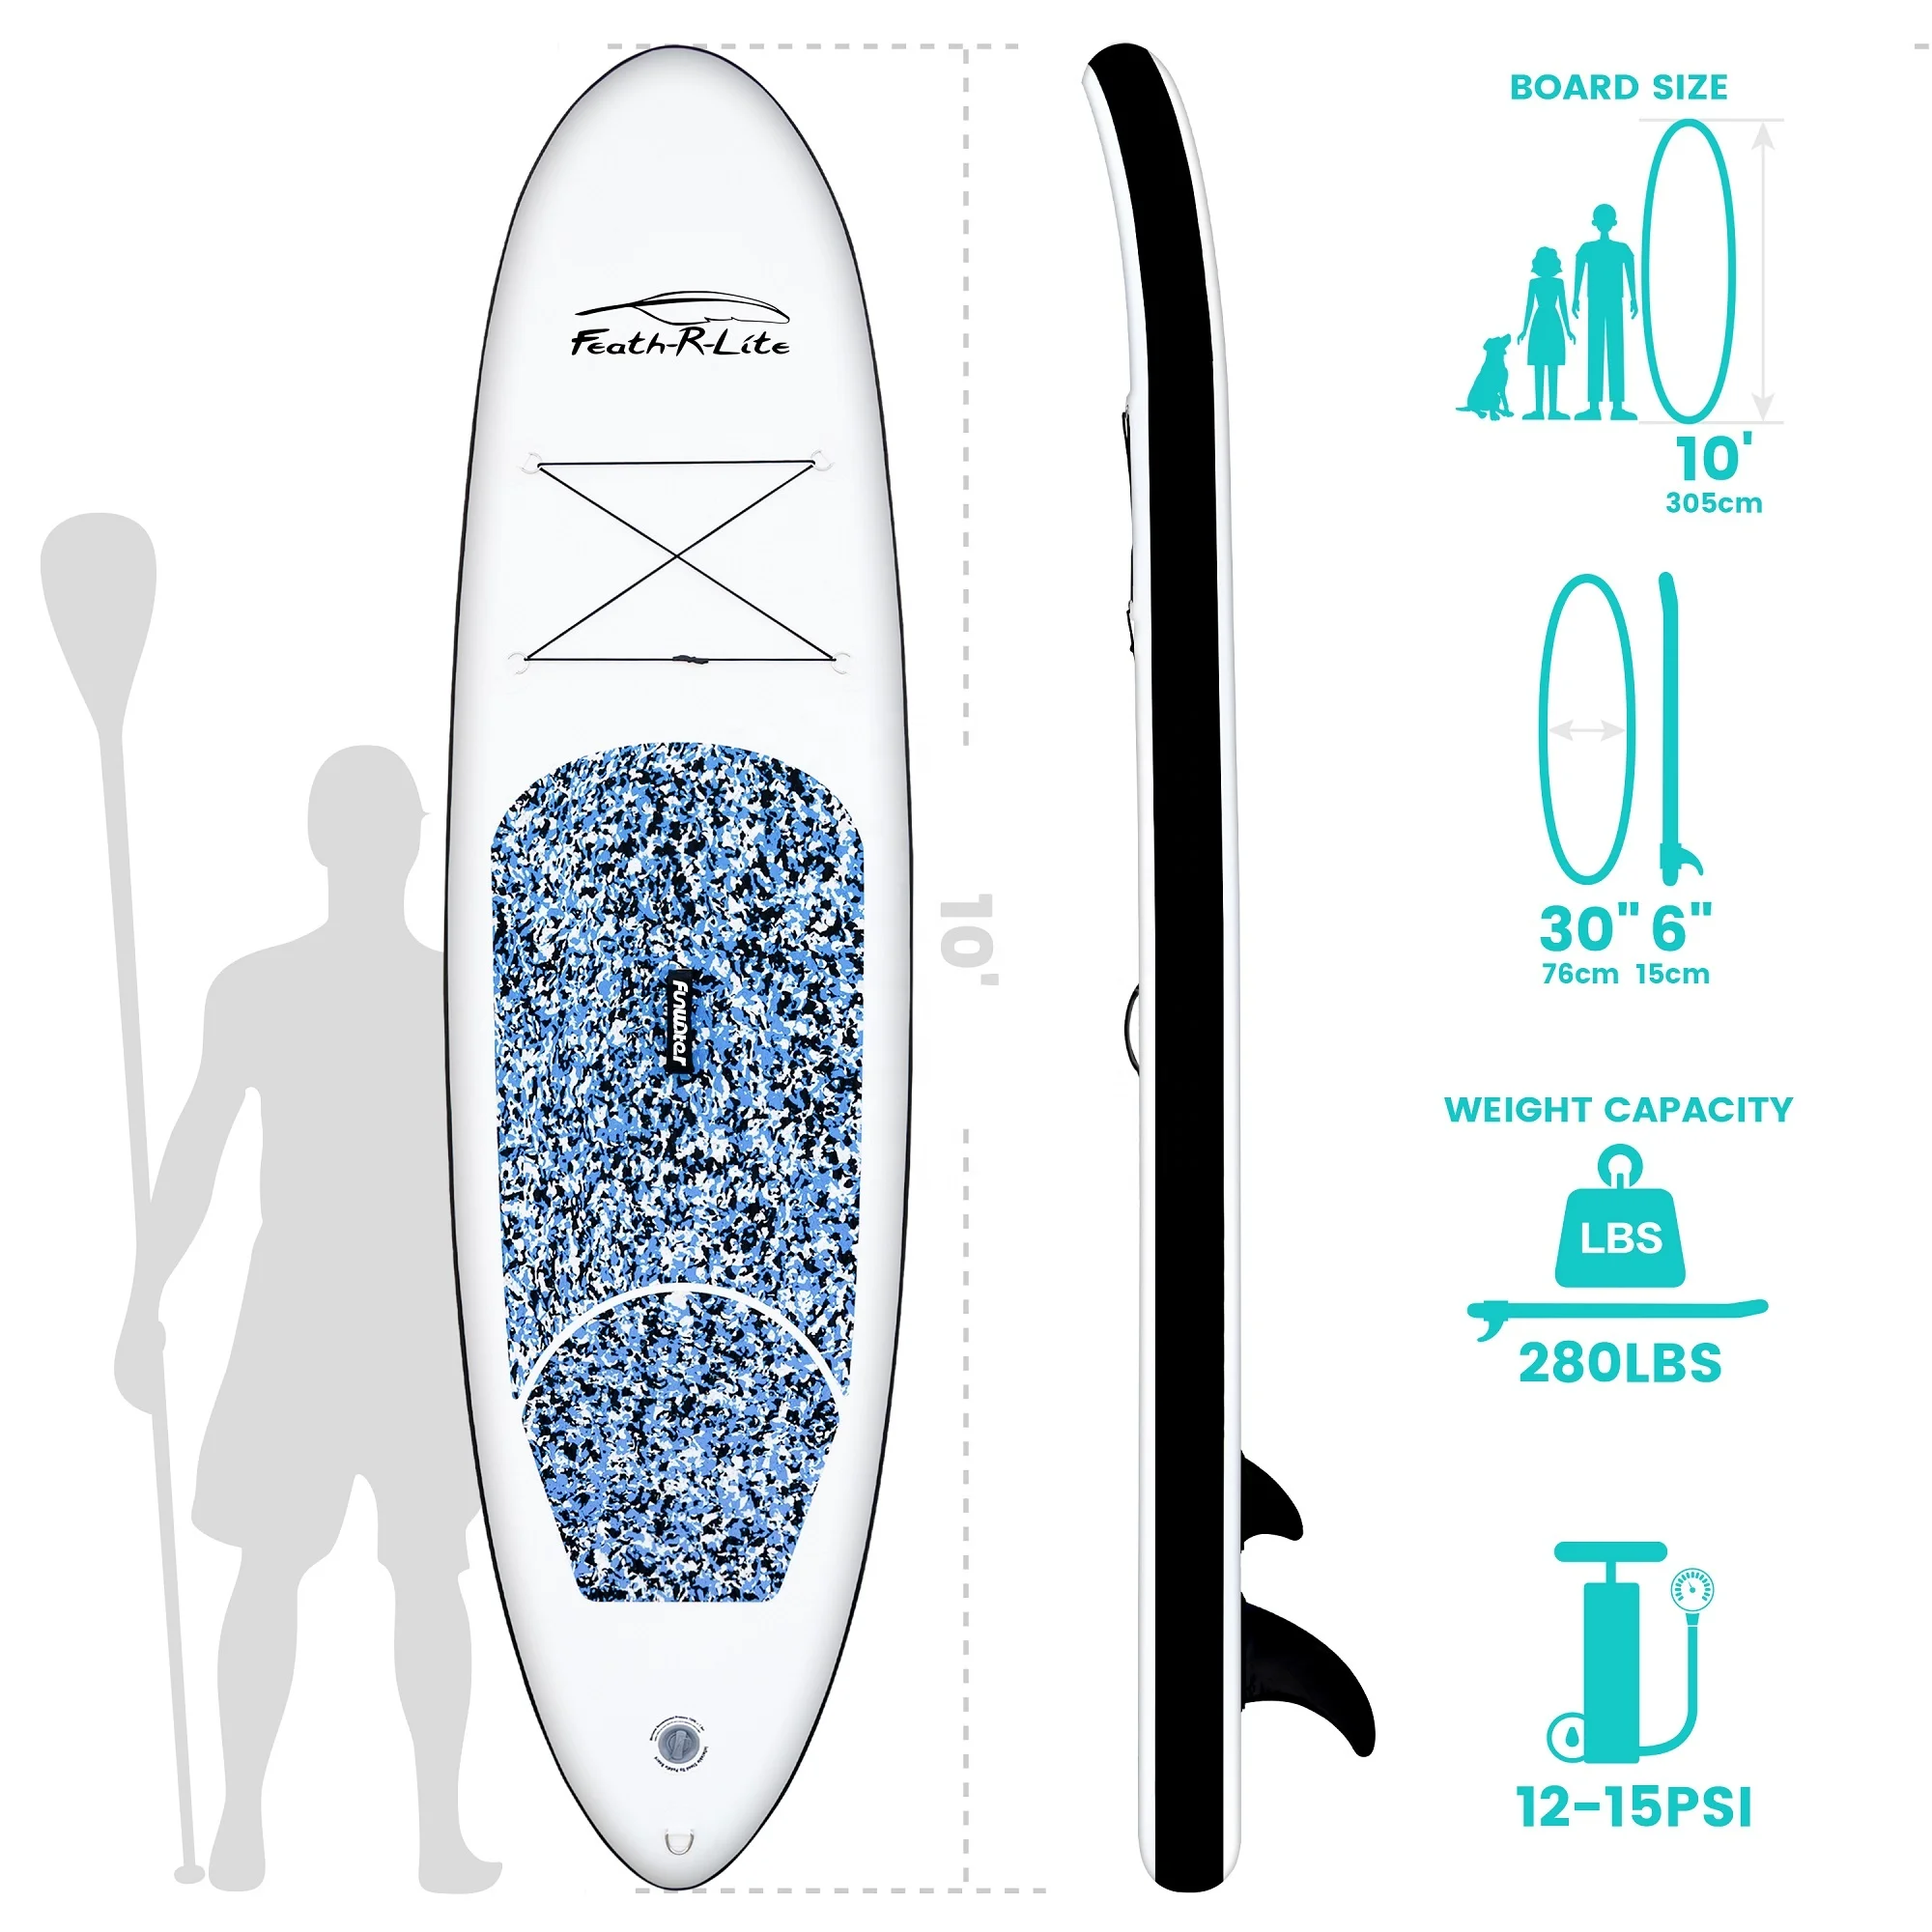 Feath r lite. Feath-r-Lite sup. Sup борд FUNWATER Tiki 10'6. Up-доска FUNWATER fw04a. Feath-r-Lite САП доска.